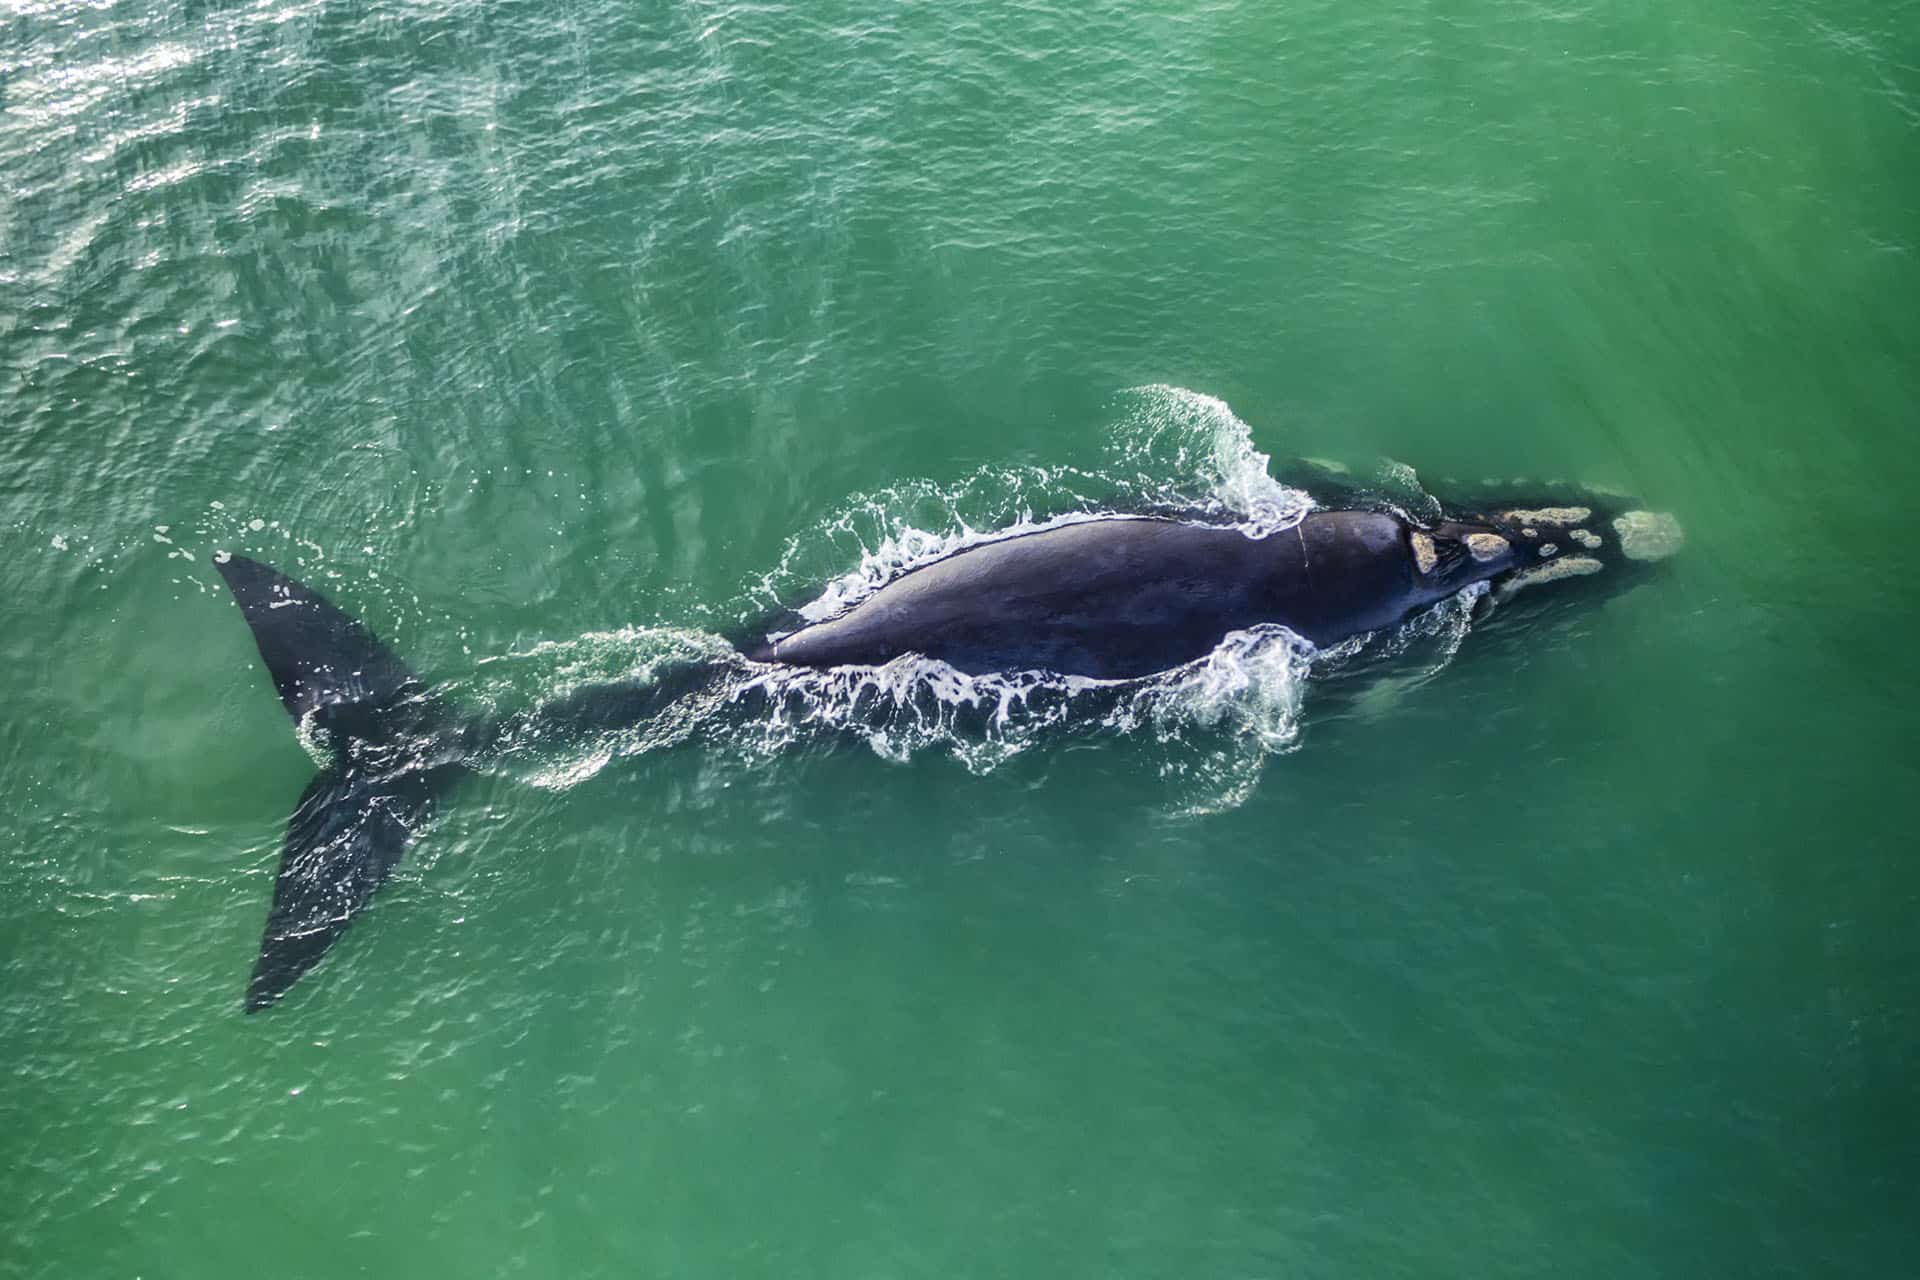 A large southern right whale swimming in open water - an animal that makes up the Marine Big Five in South Africa.